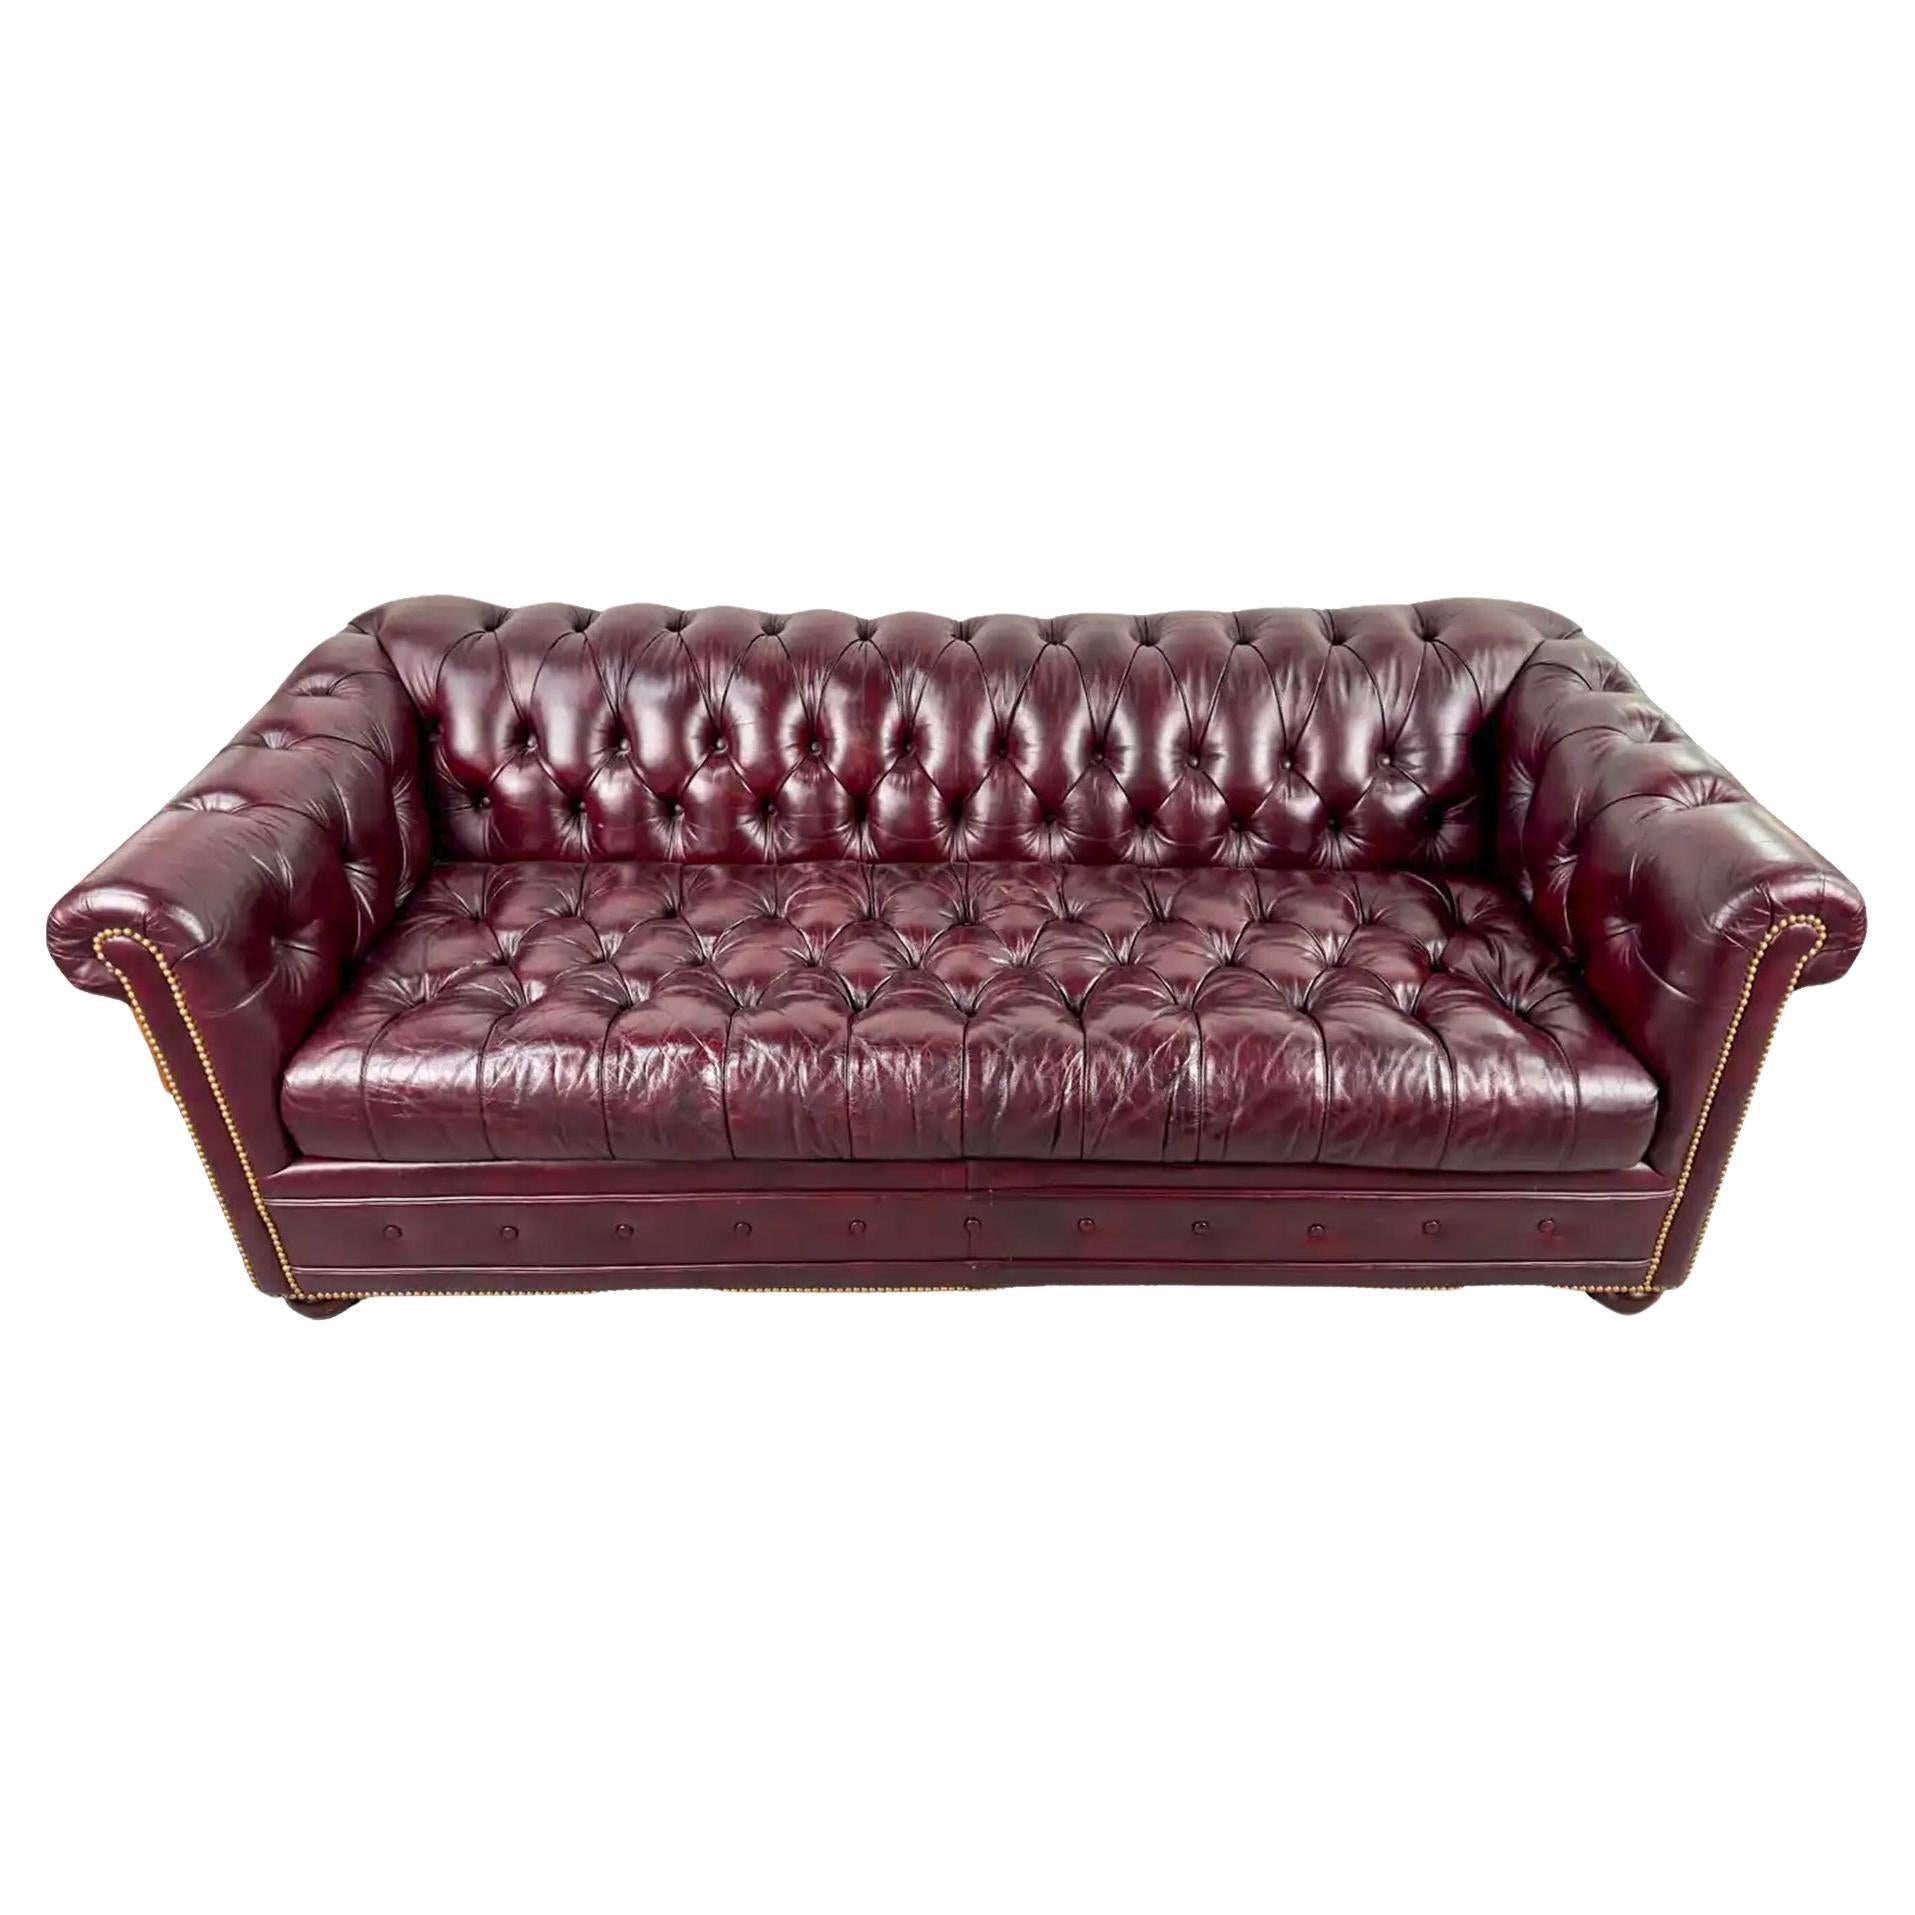 Hancock & Moore English Style Chesterfield Cranberry leather Sofa & Sofa Bed For Sale